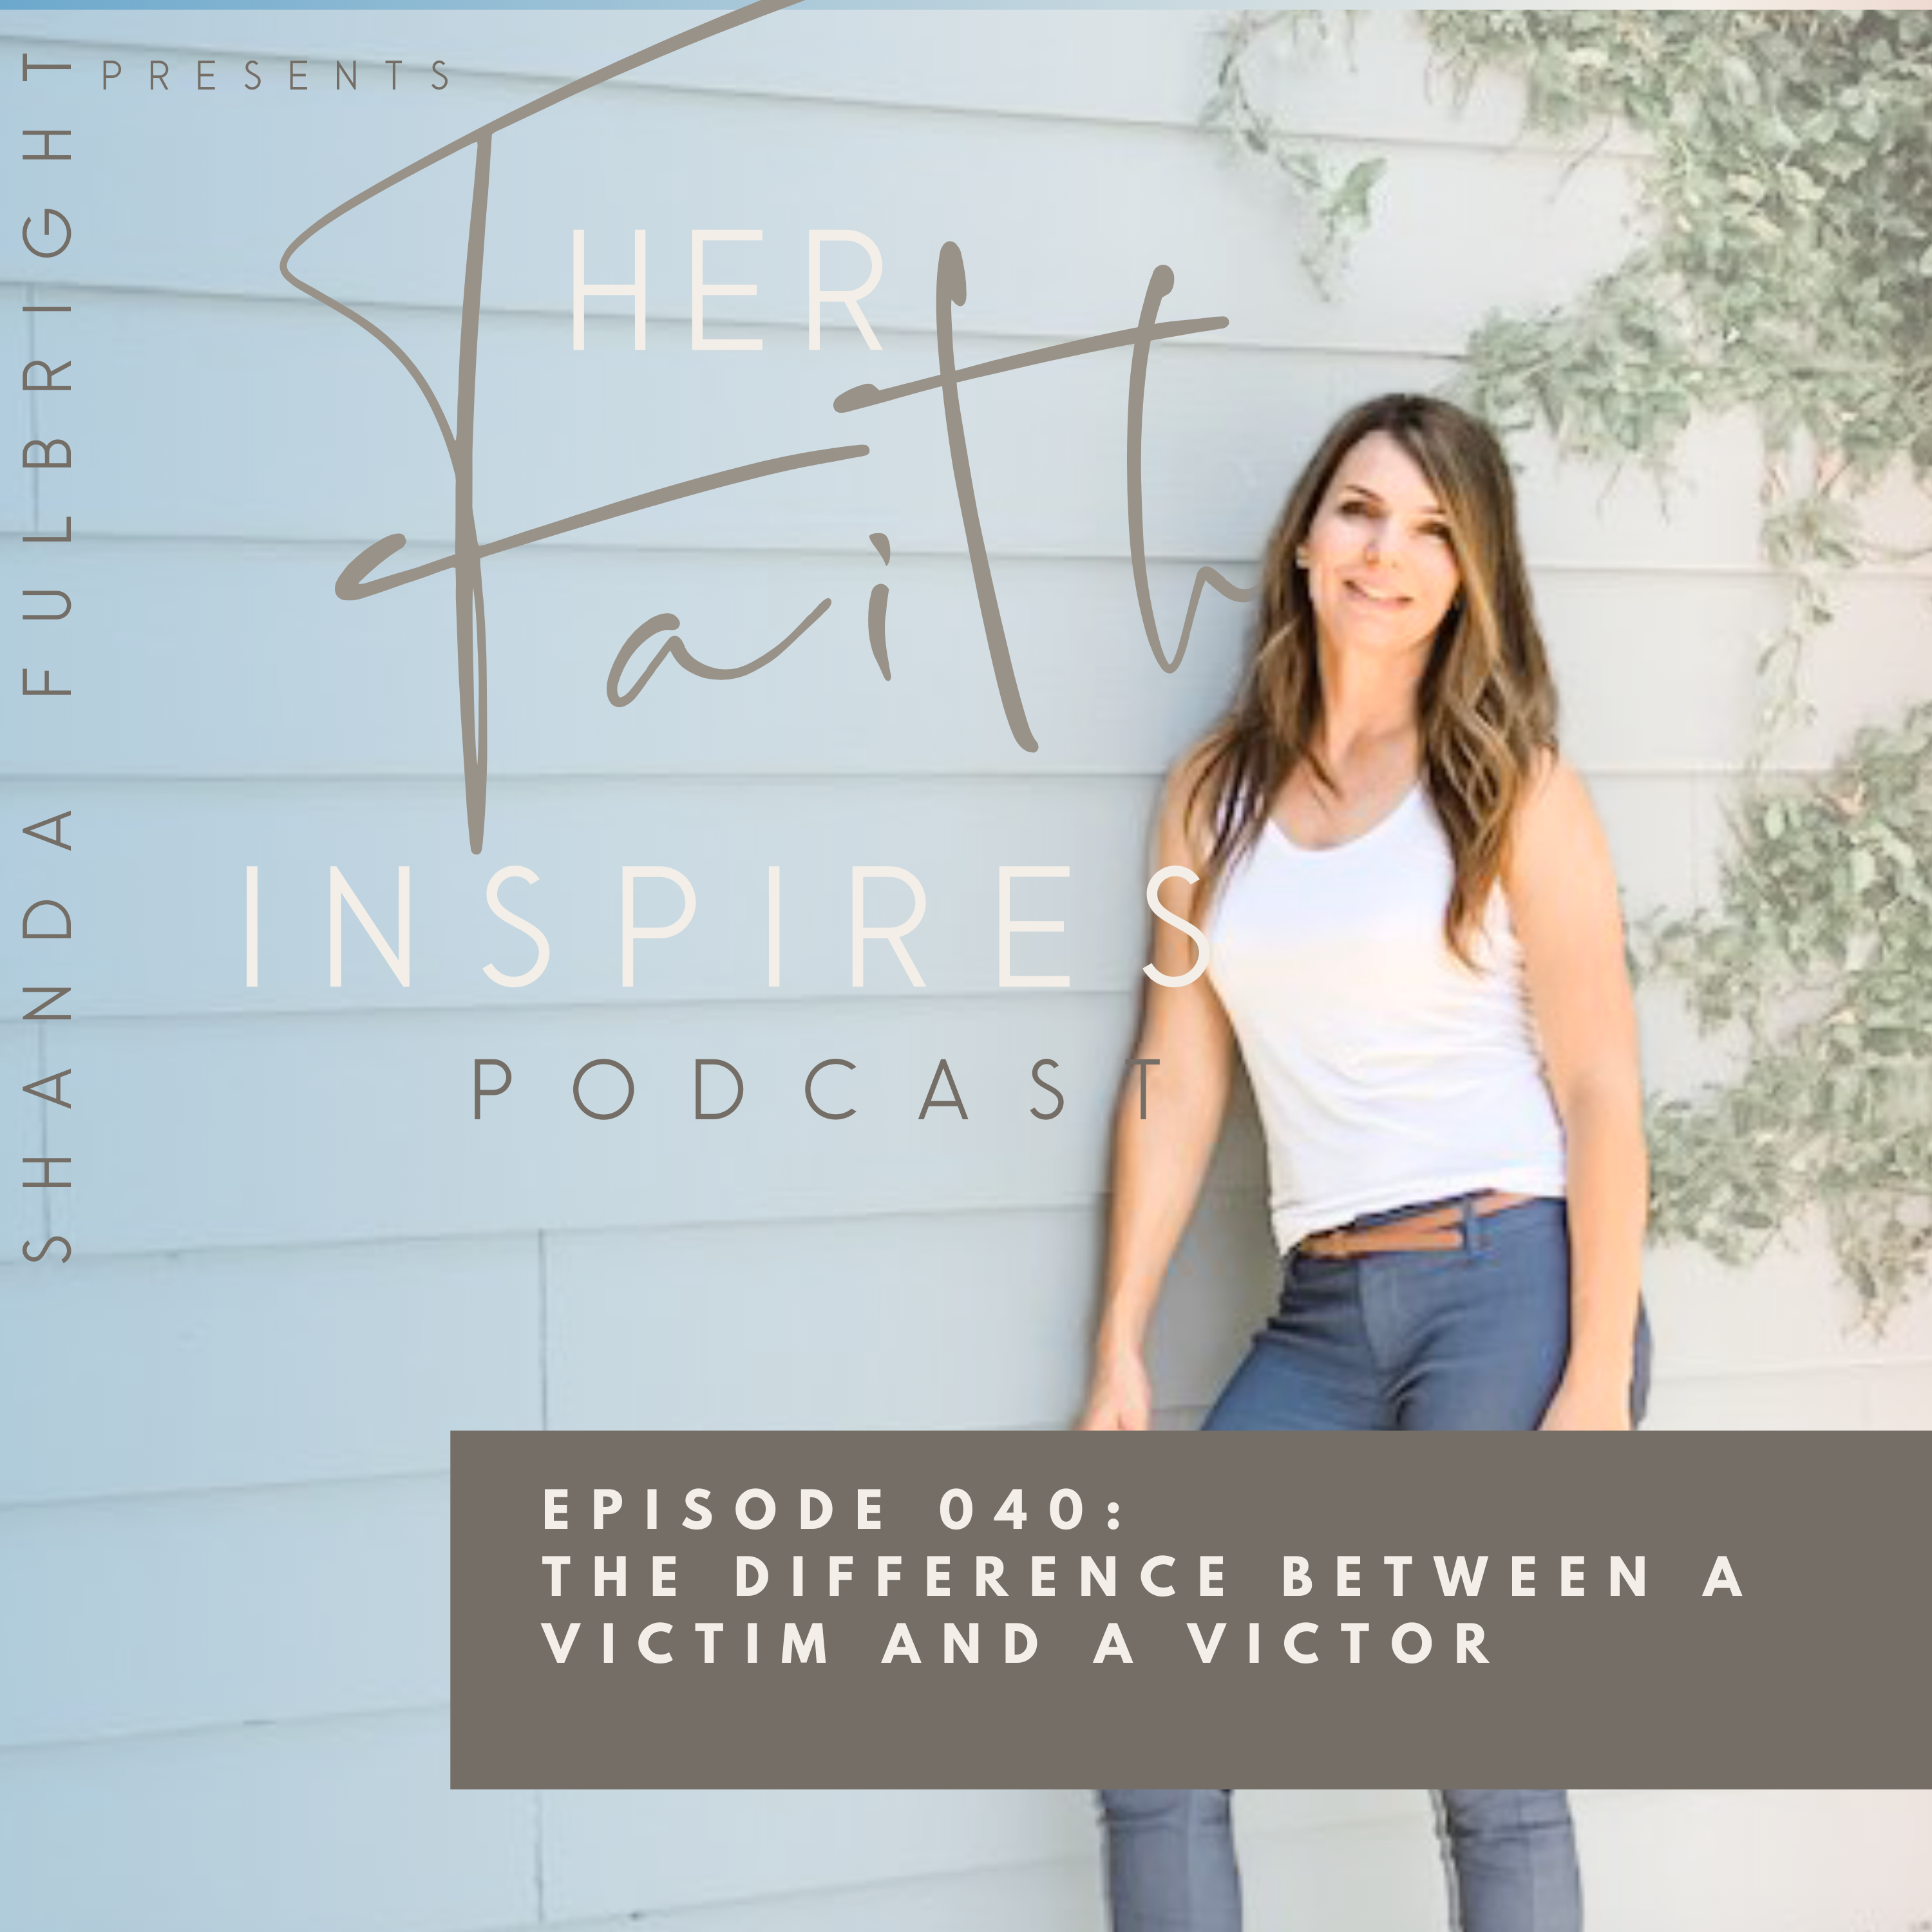 SF Podcast Episode40 - HER FAITH INSPIRES 040 : The difference between a victim and a victor